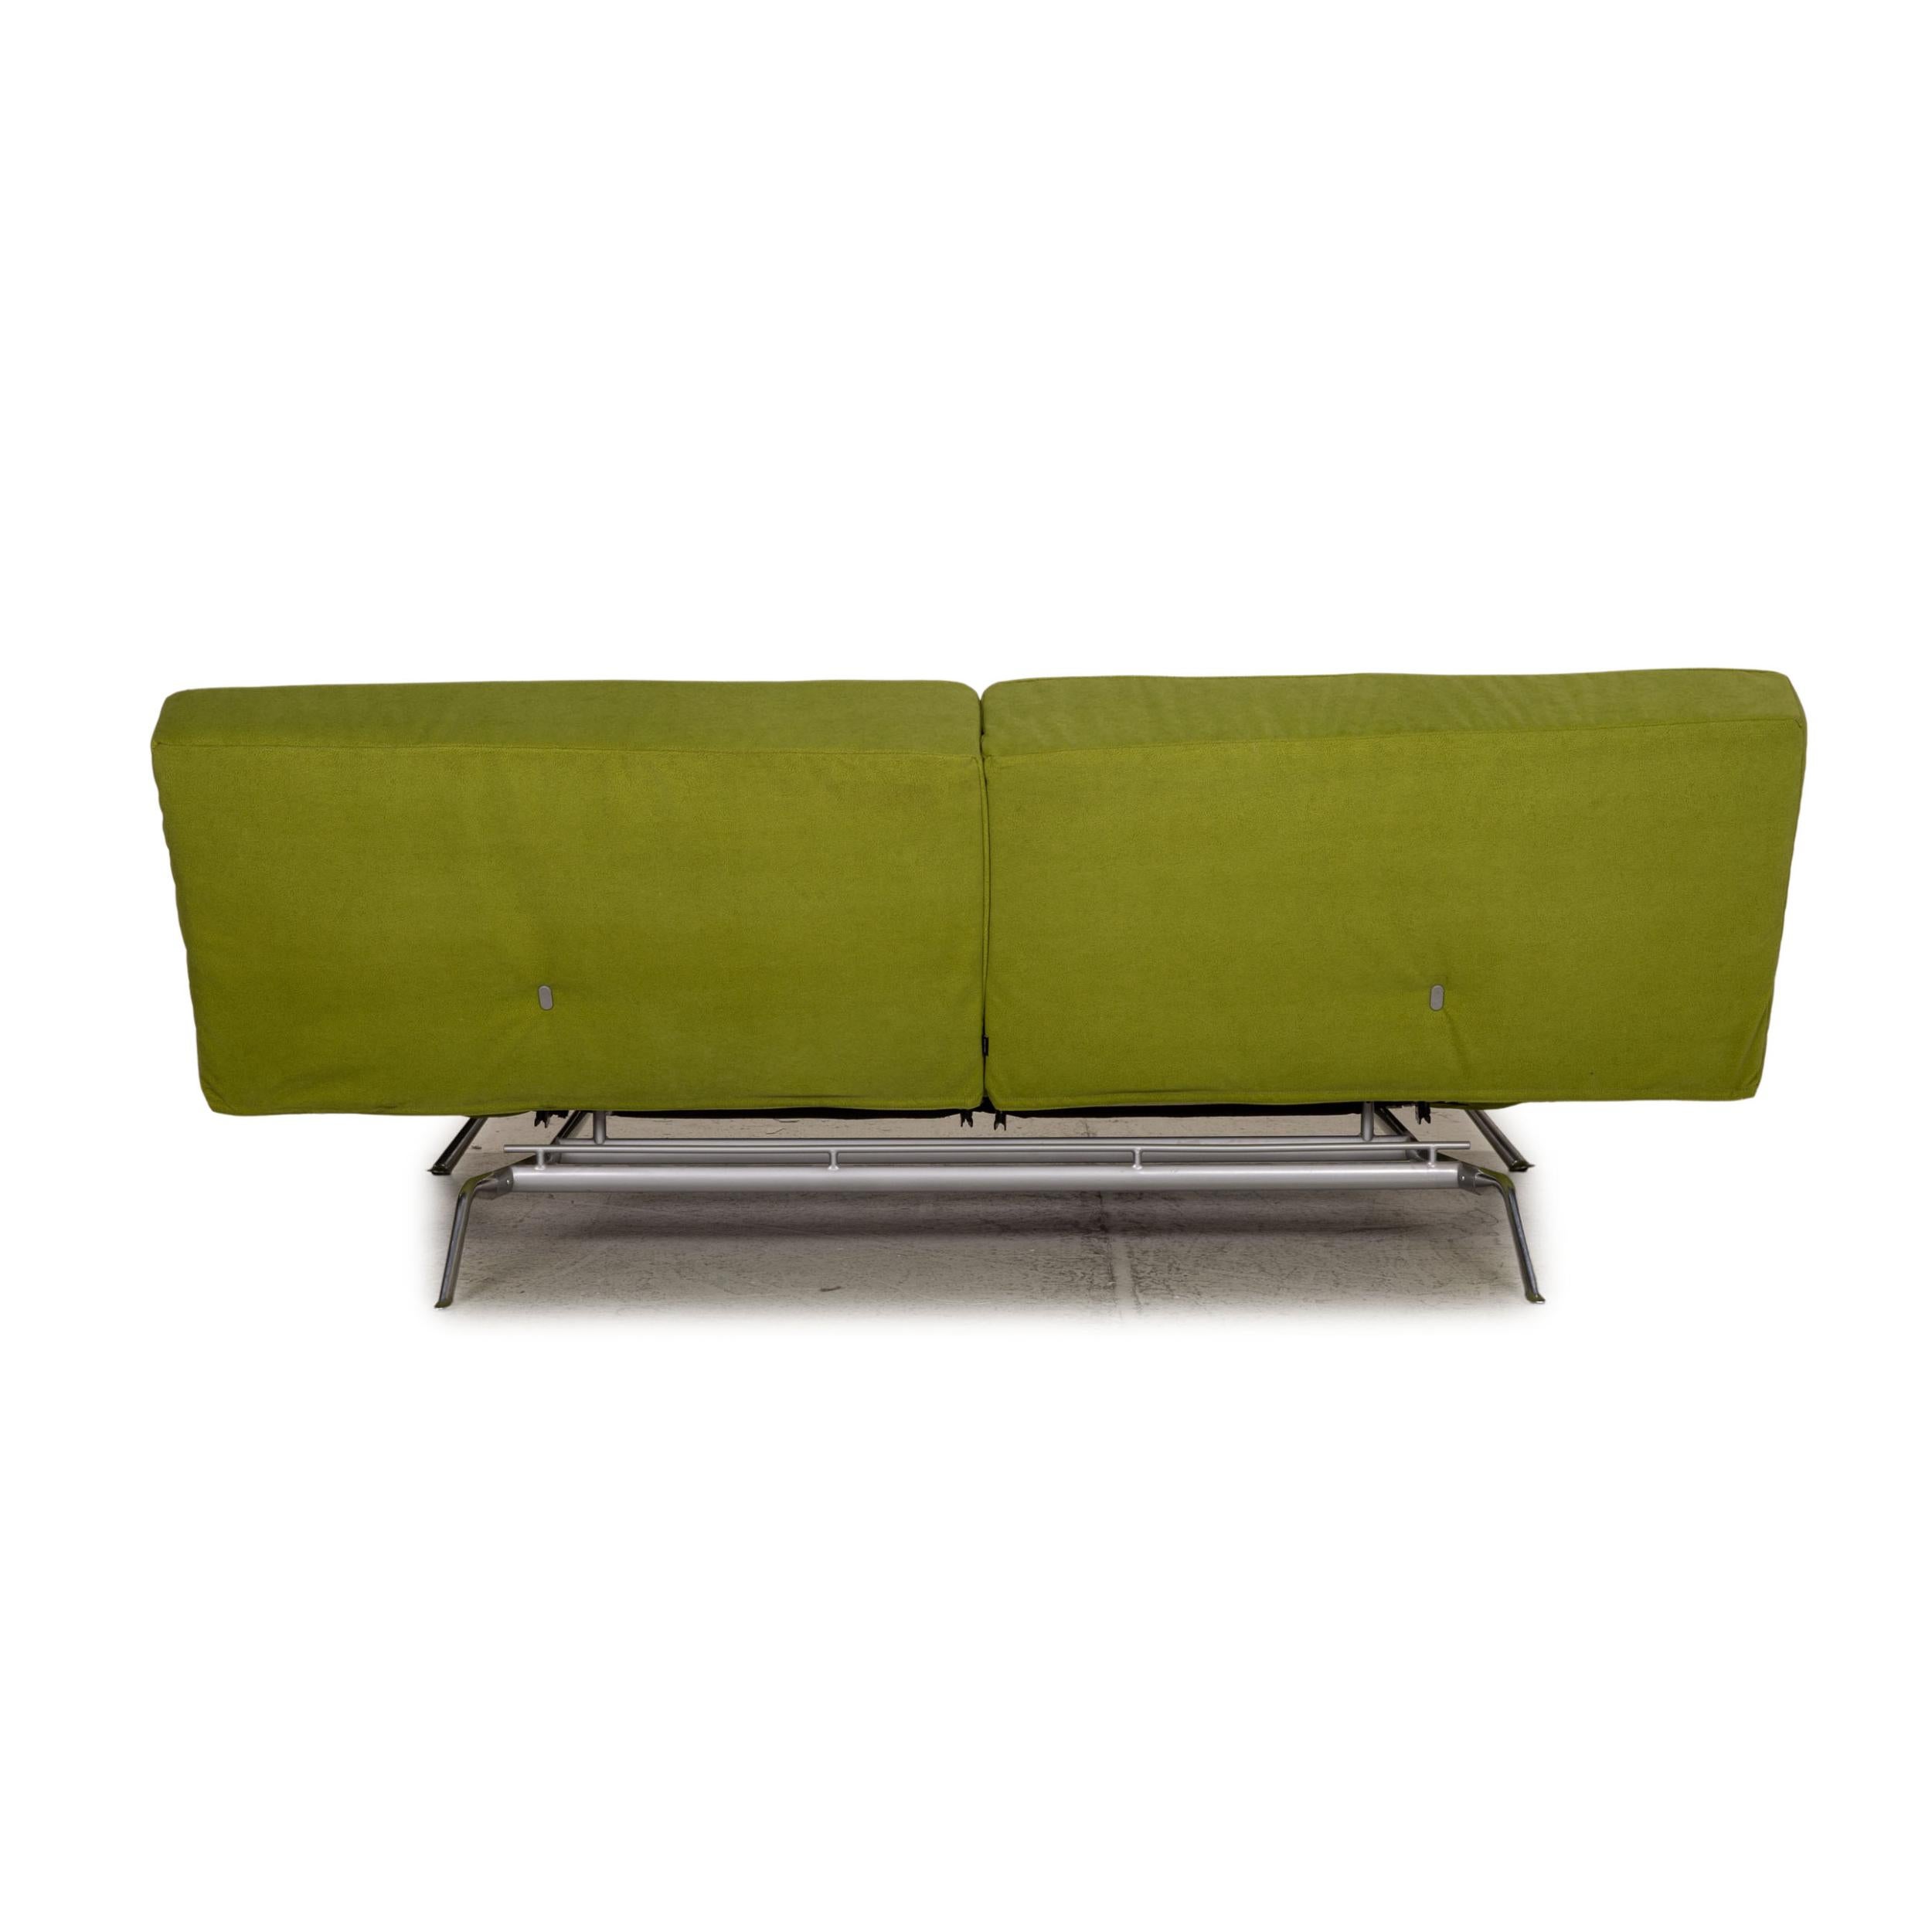 Contemporary Ligne Roset Smala Fabric Sofa Green Three-Seater Couch Function Sleeping